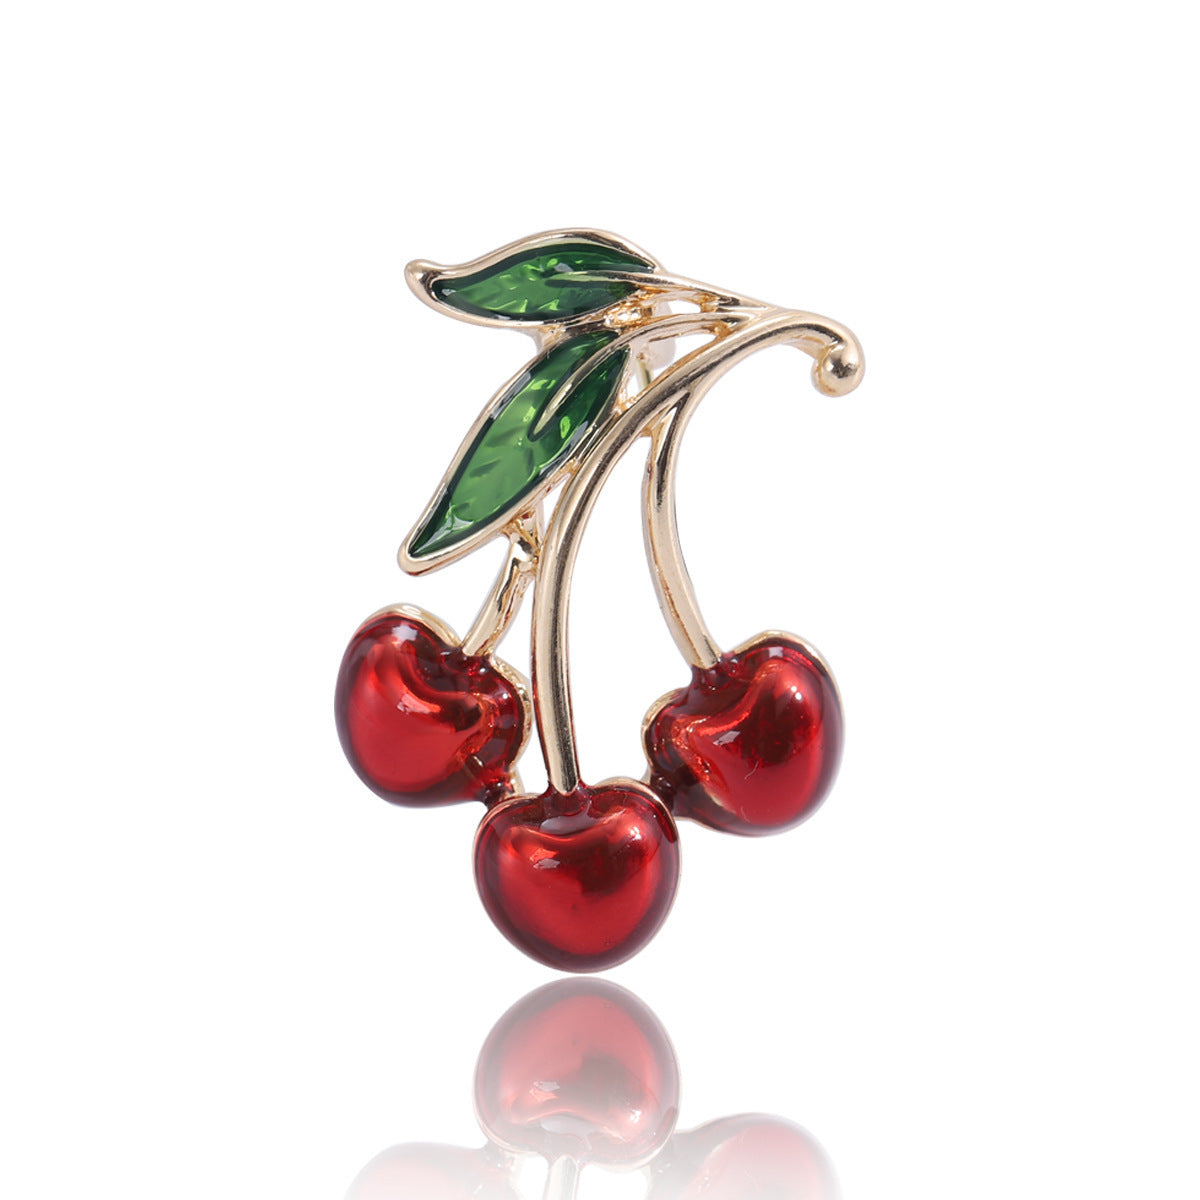 Clothing Accessories Clothing Brooch Red Dripping Cherry